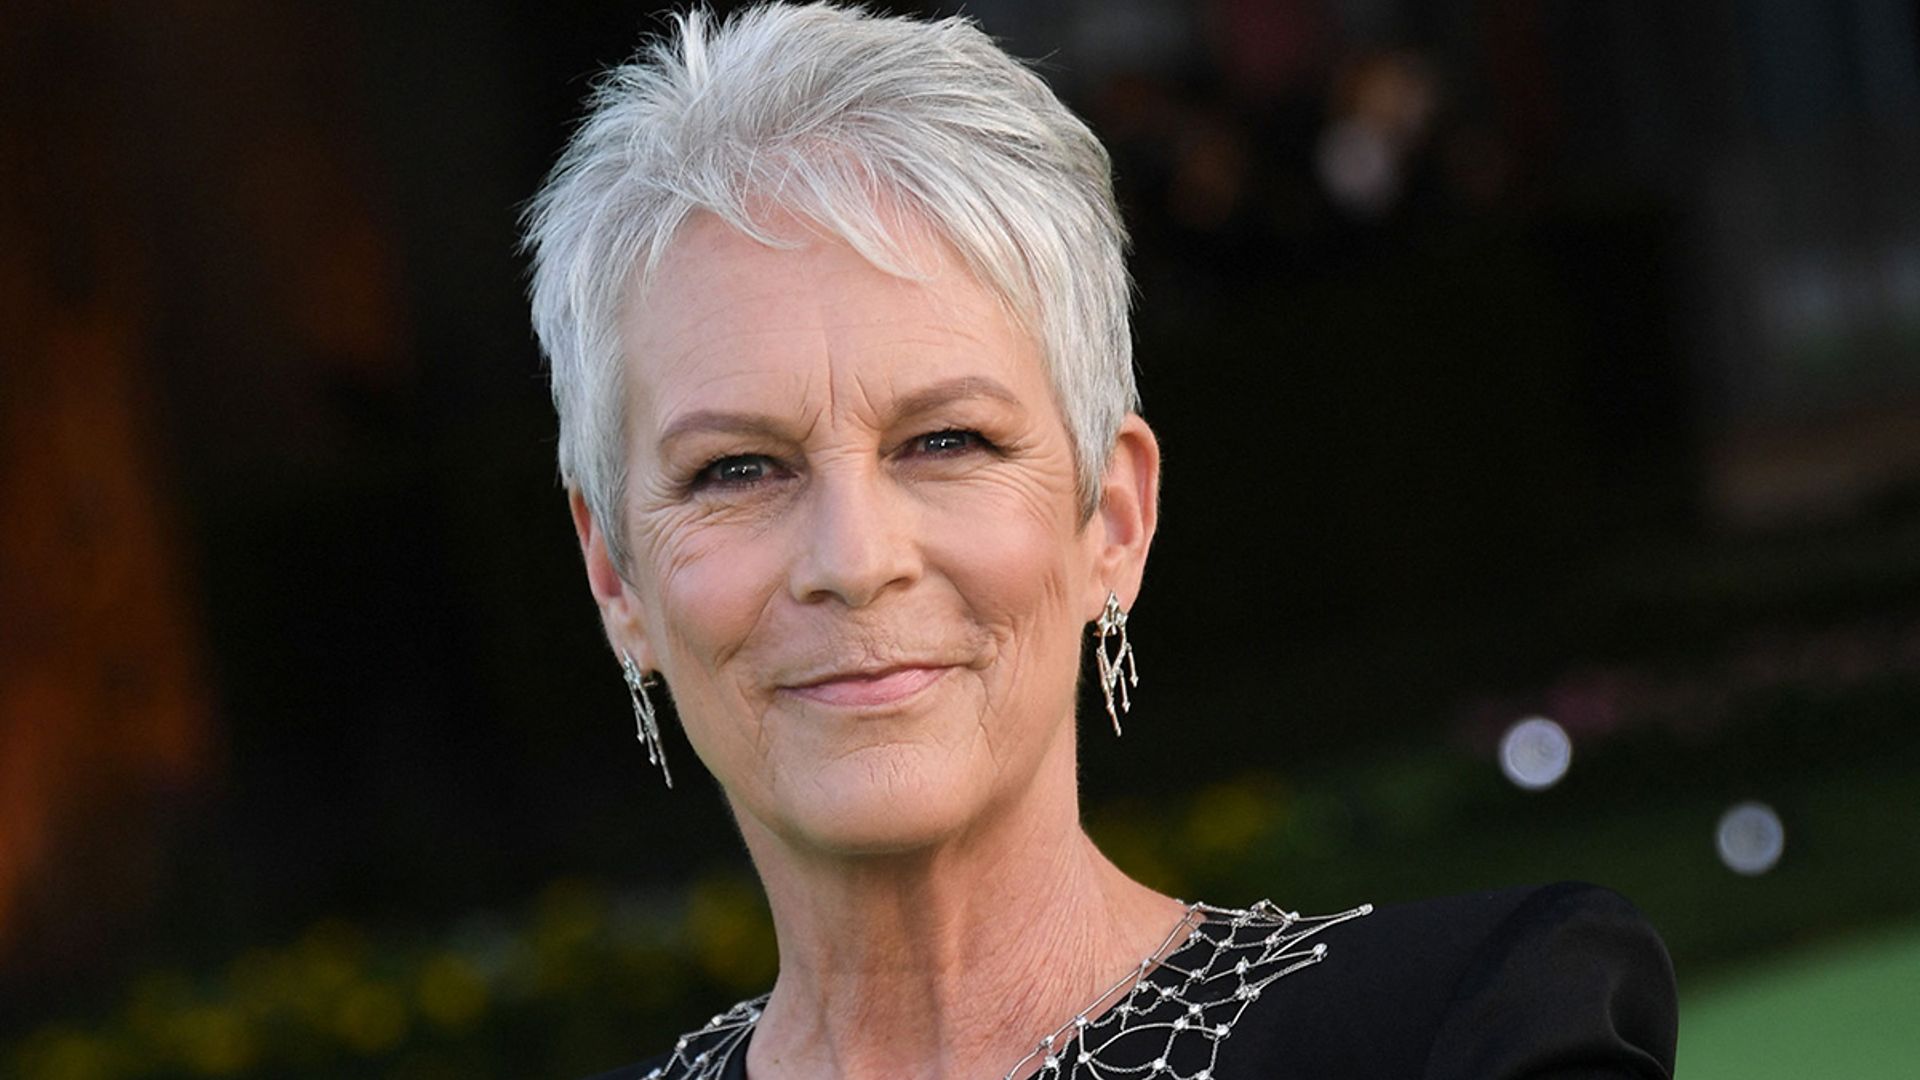 Jamie Lee Curtis shares first photo of daughter Ruby alongside heartfelt message